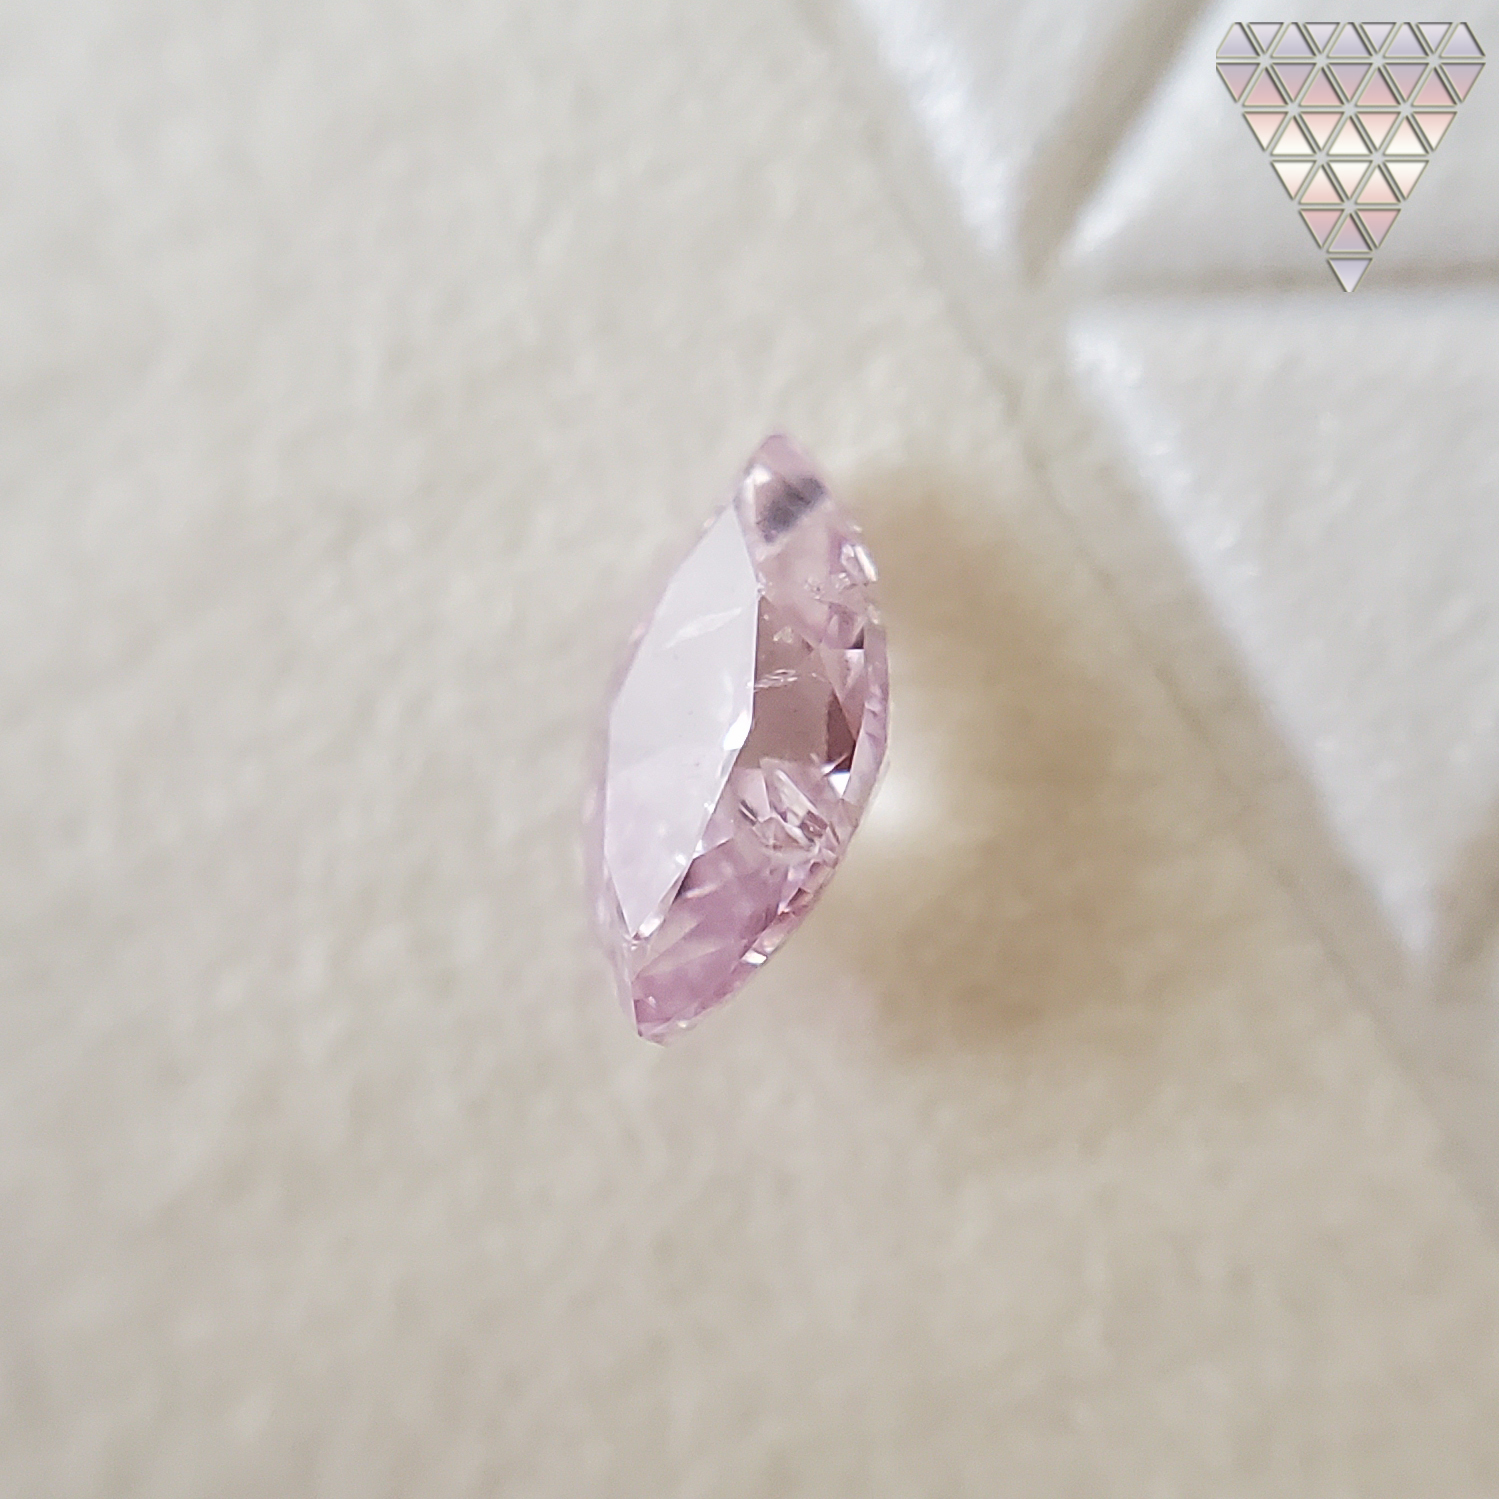 0.114 Ct Fancy Purple Pink I2 Marquise AGT Japan Natural Loose Diamond Exchange Federation 6